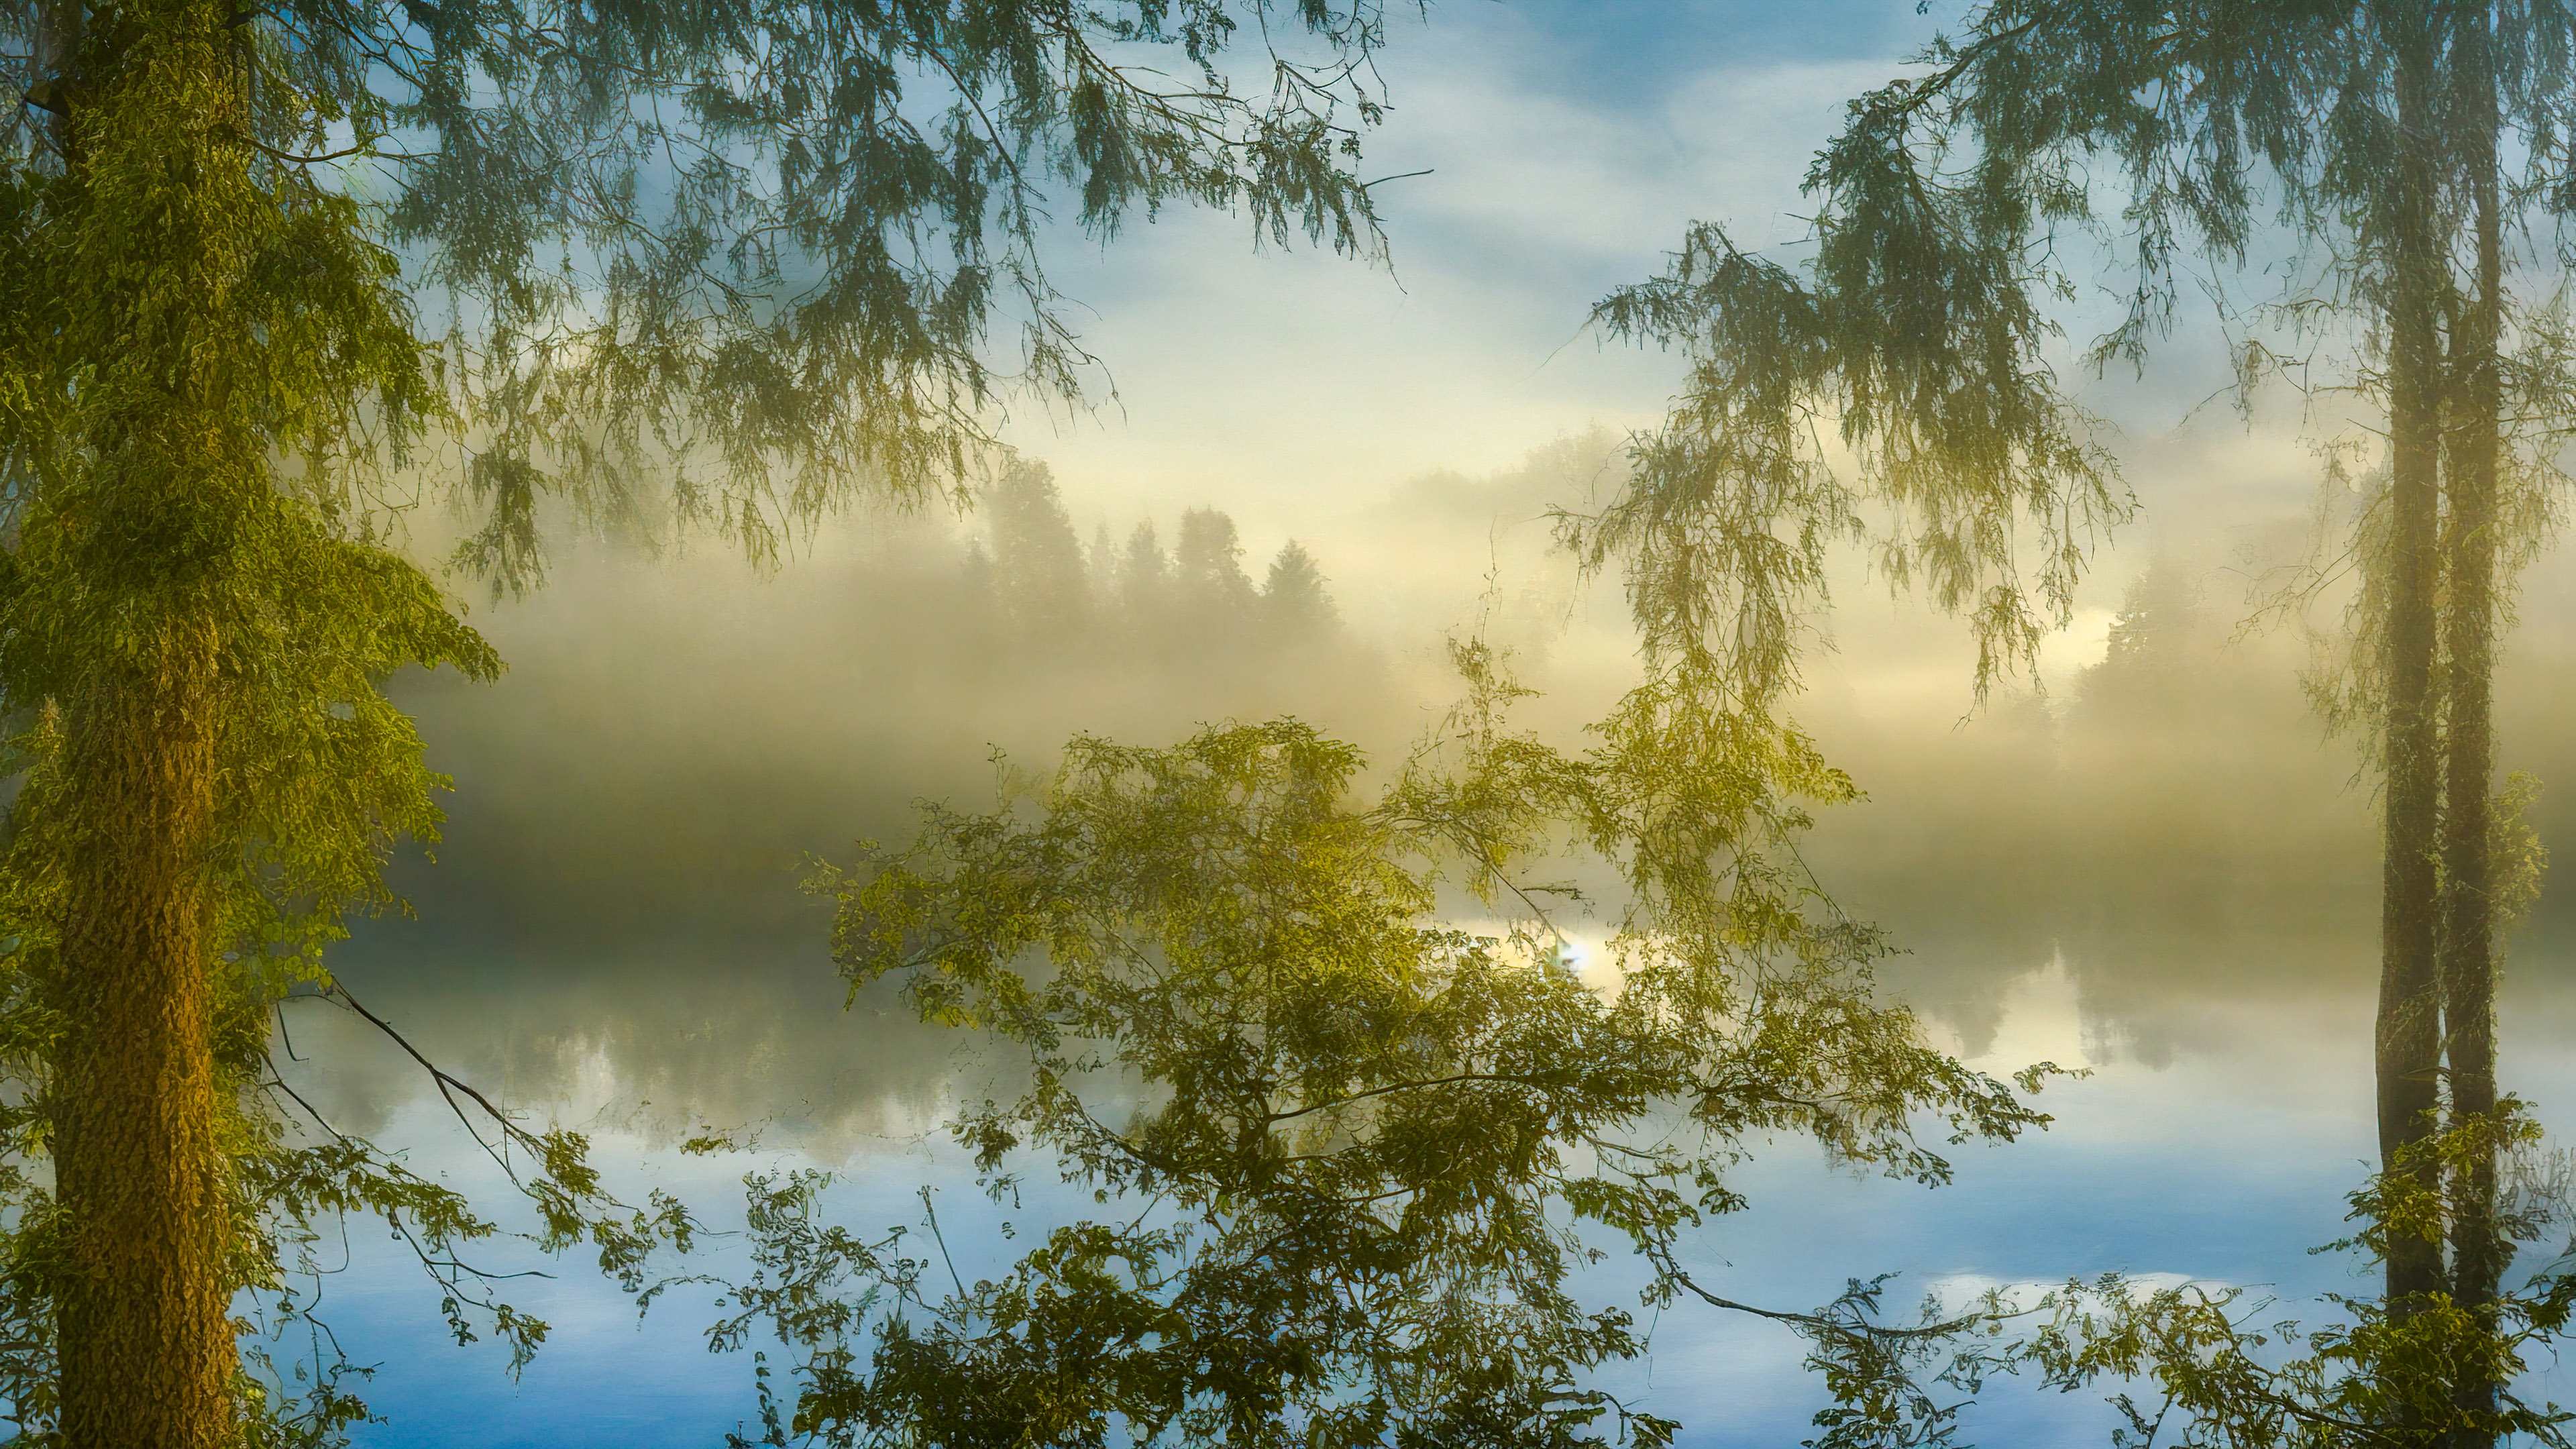 Experience the speed and power of our full-screen wallpaper in HD nature, capturing a serene lakeside scene at dawn, with mist rising from the water and the first light of day, and let your device’s screen become a window to the natural world.